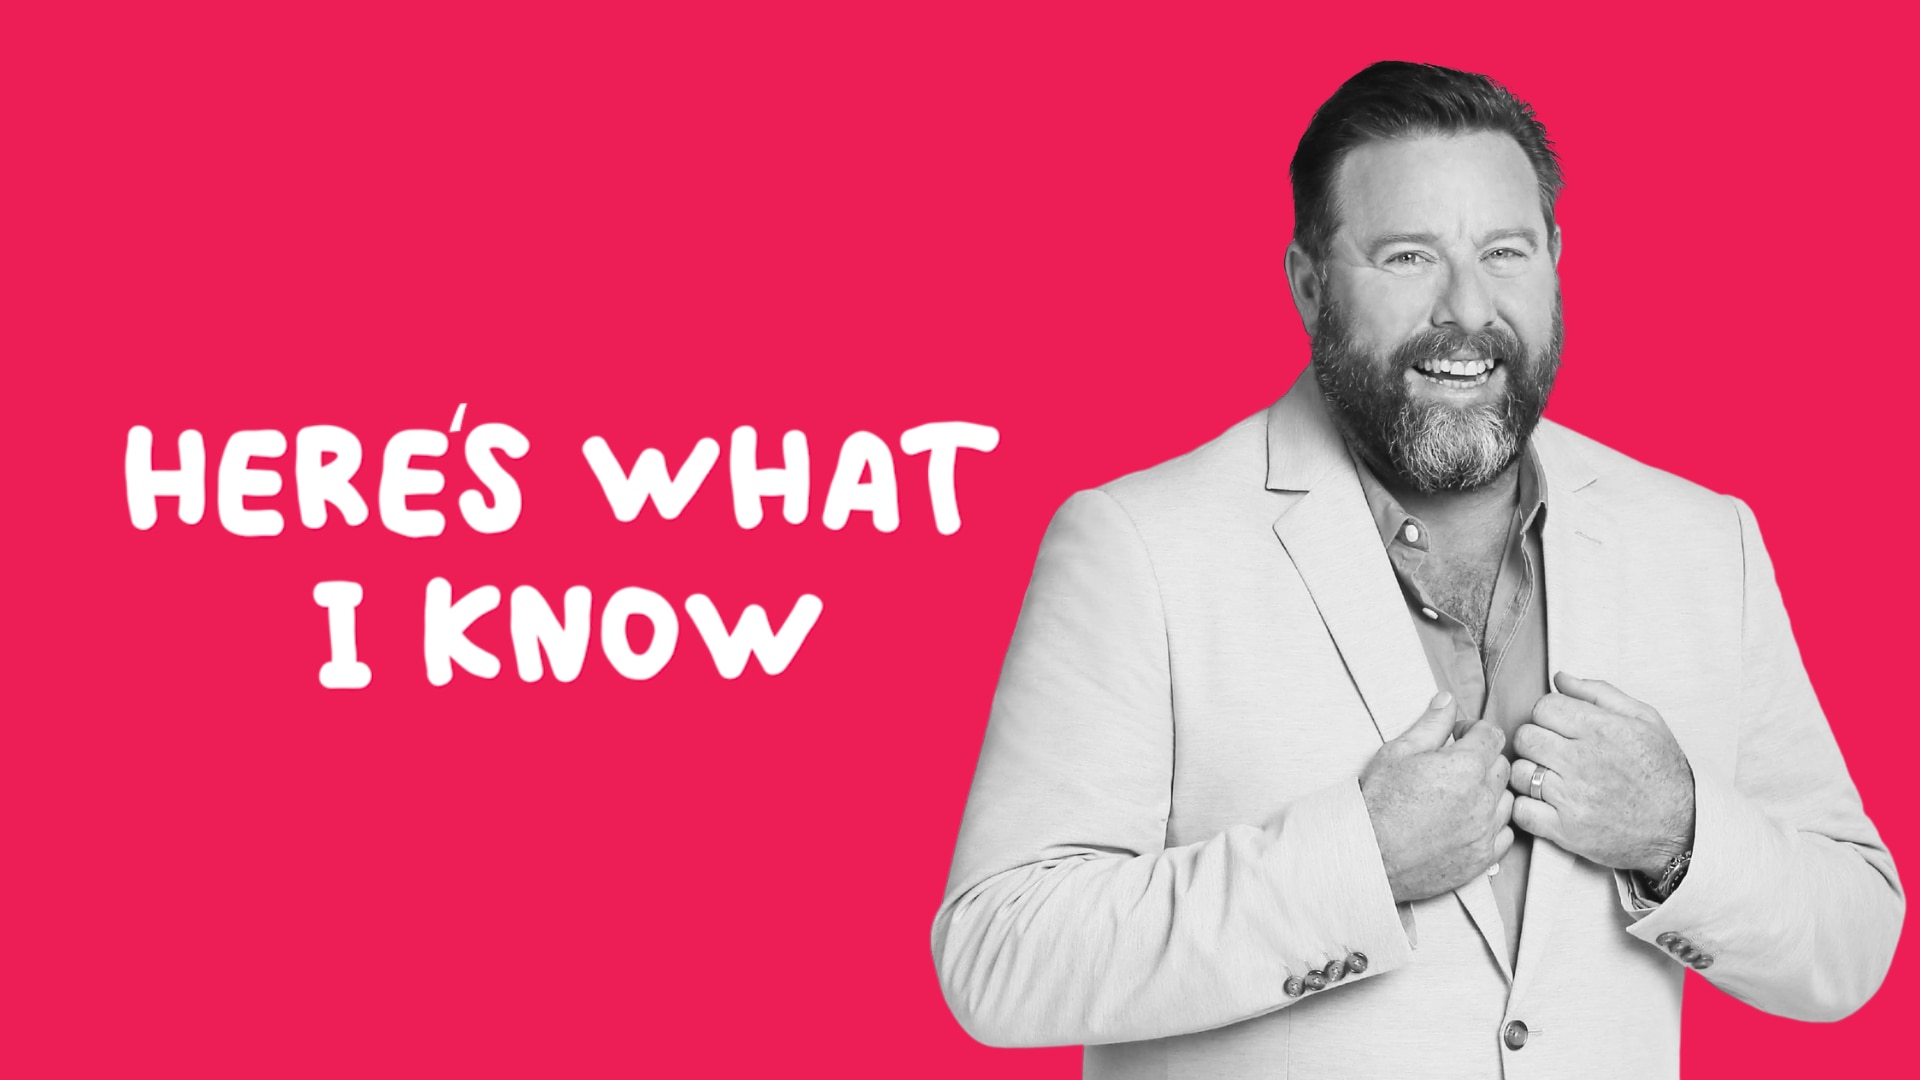 Here's What I Know: what Shane Jacobson's learned about bending the truth